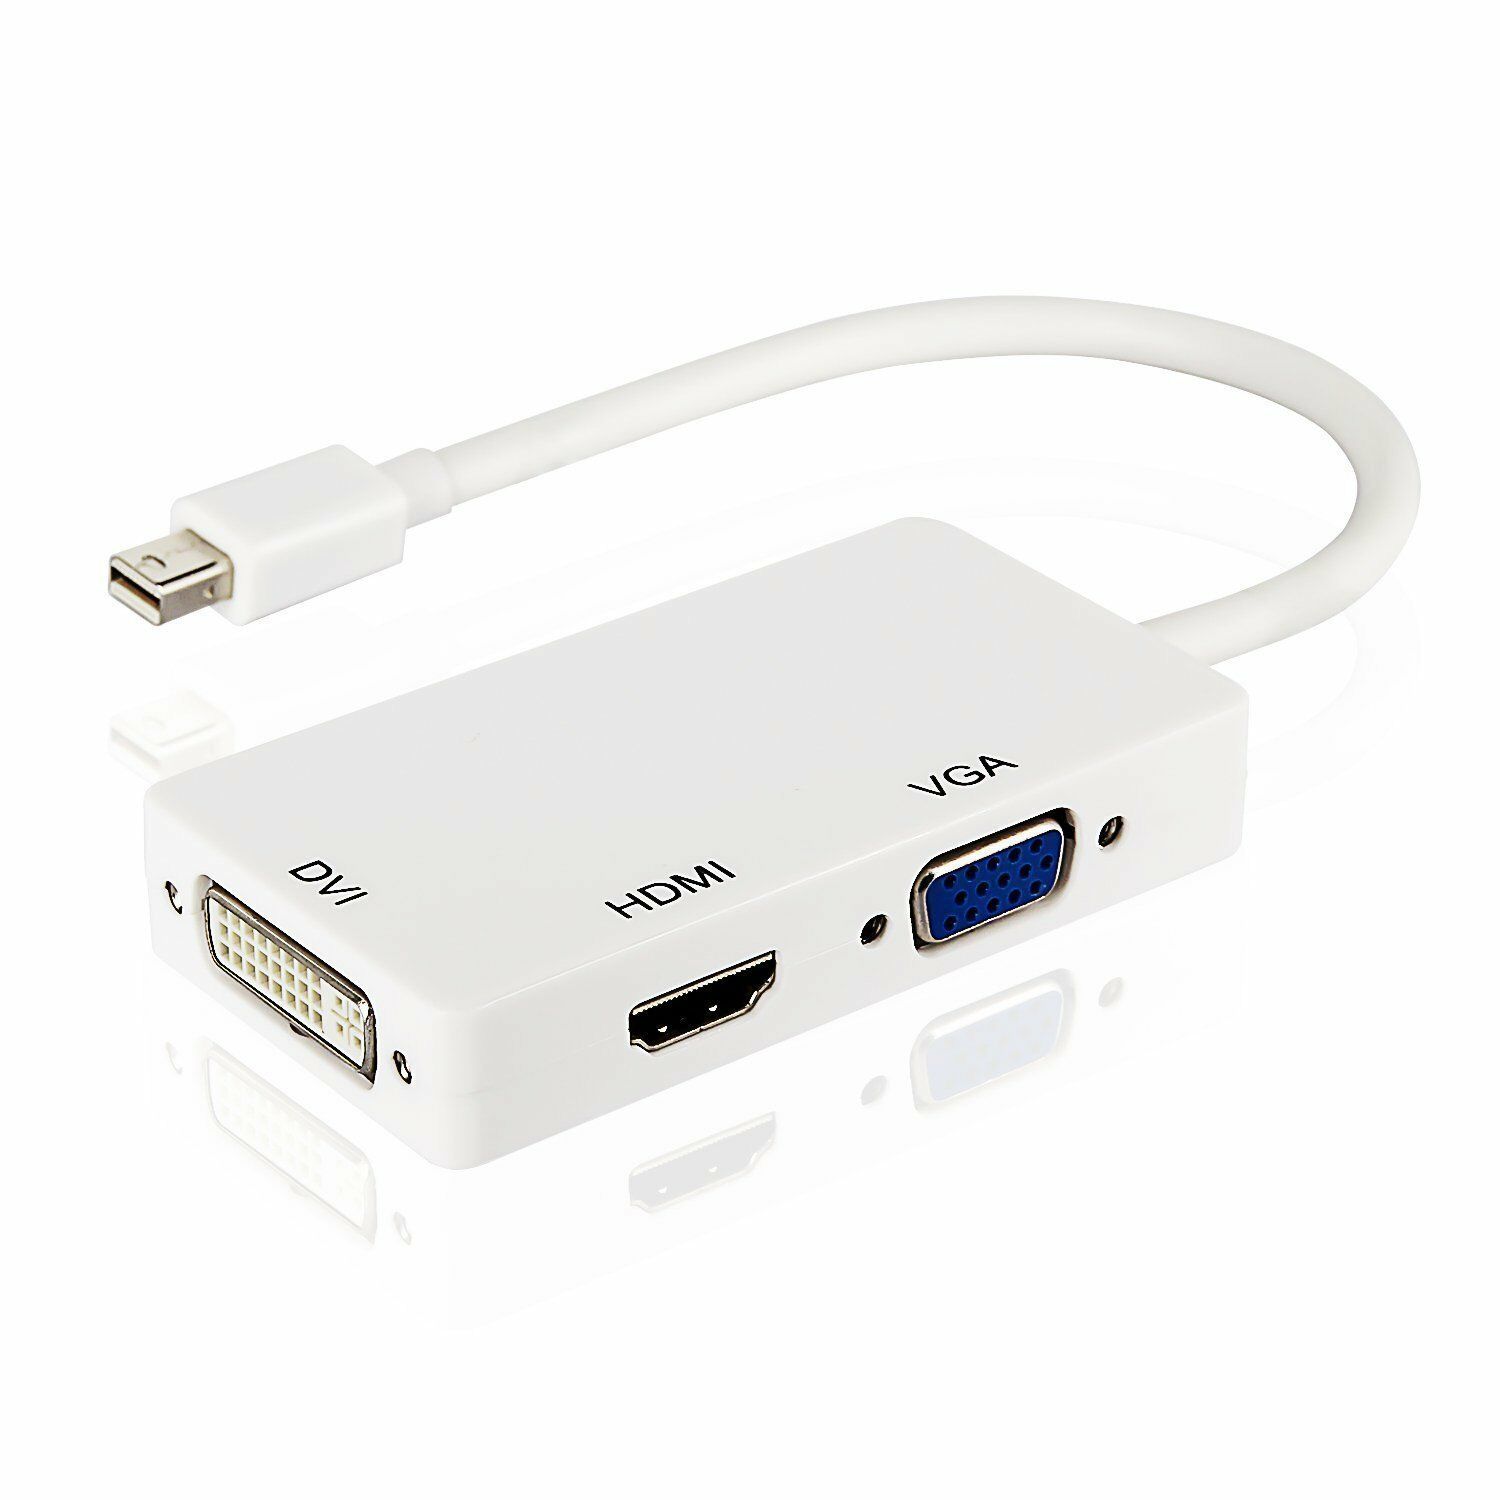 3 In 1 Thunderbolt Mini Display Port Dp To Hdmi Dvi Vga Adapter Cable For Apple